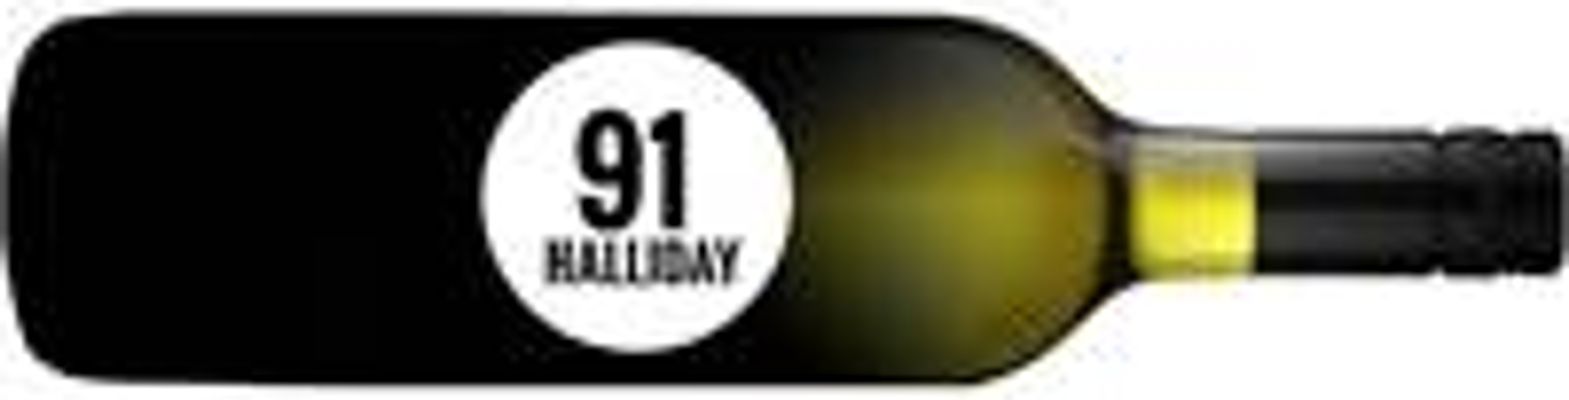 Secret 91 Point Riesling